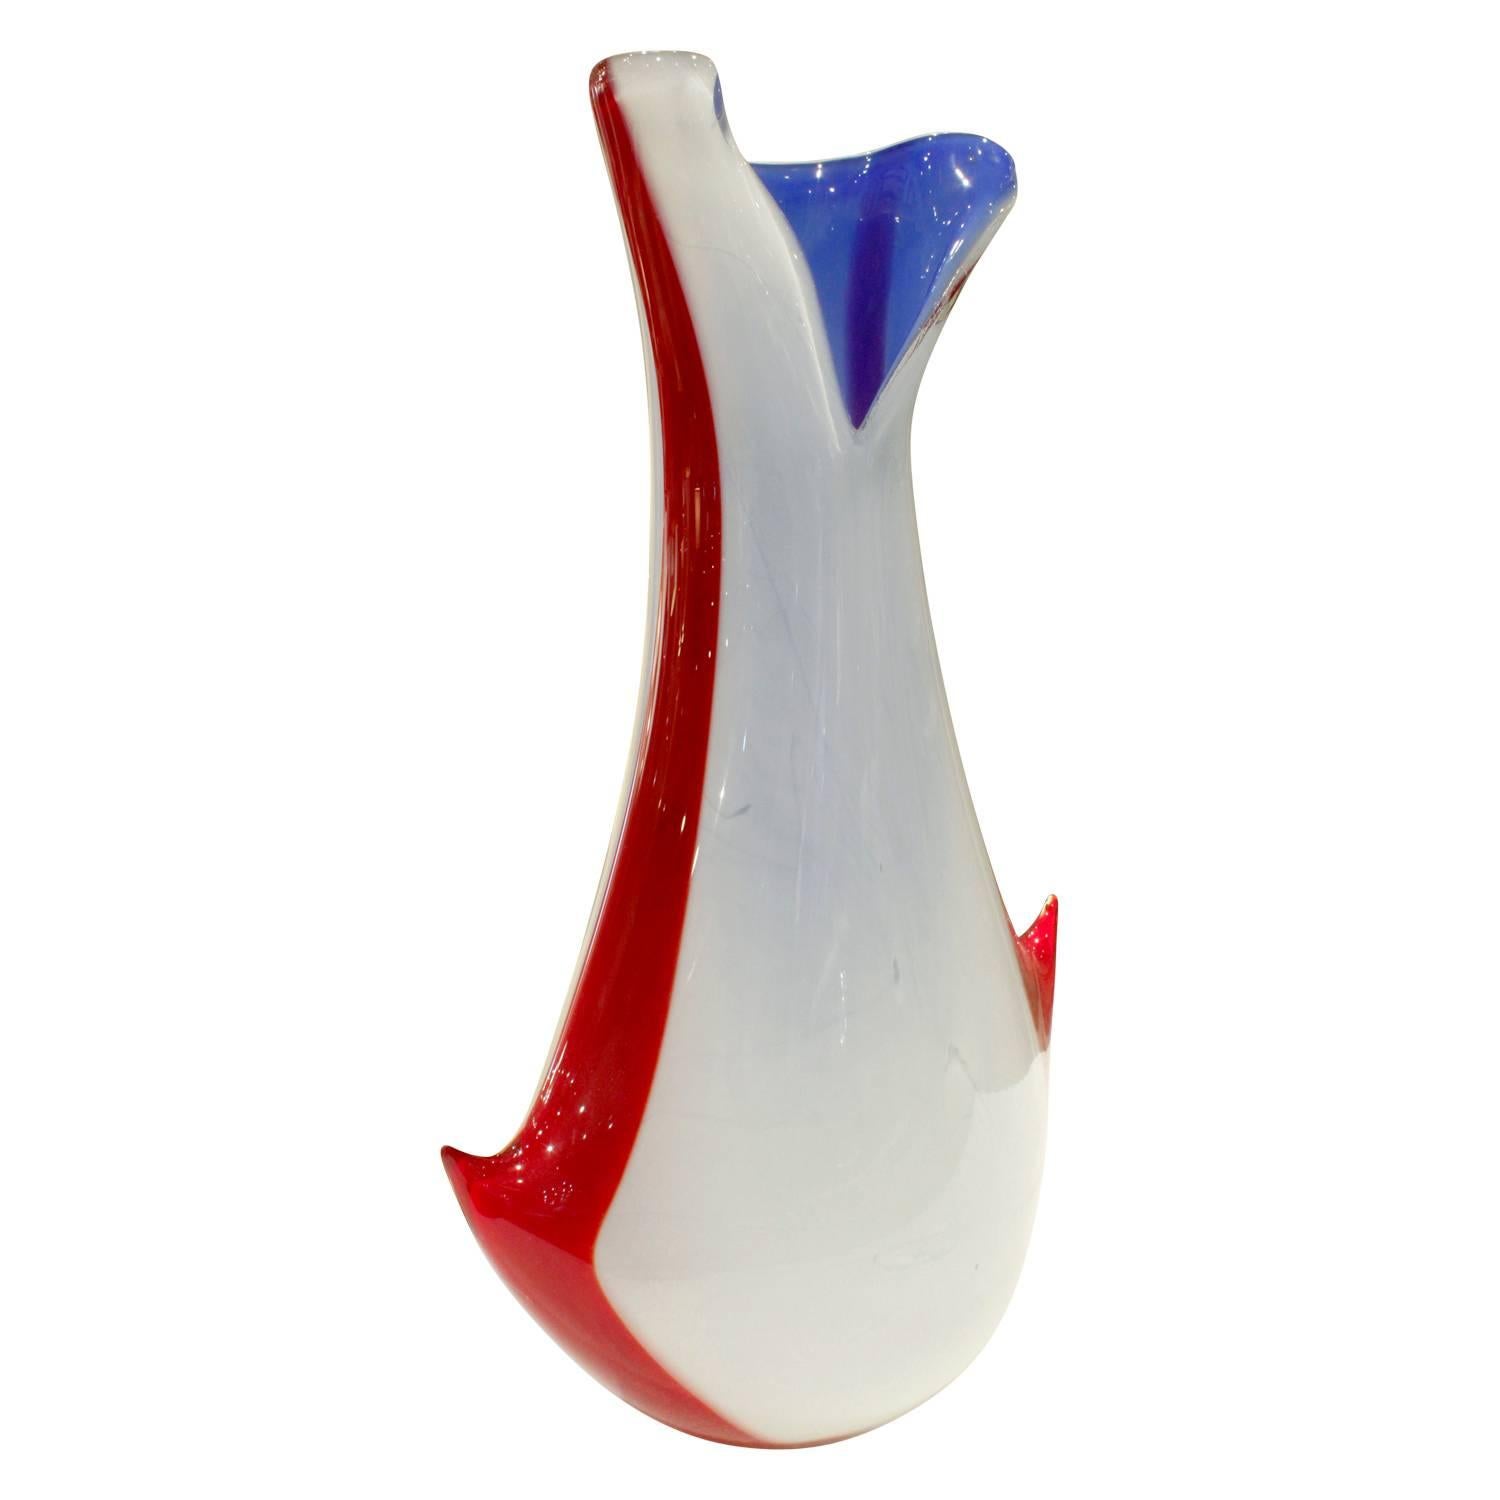 Important handblown glass vase from the 